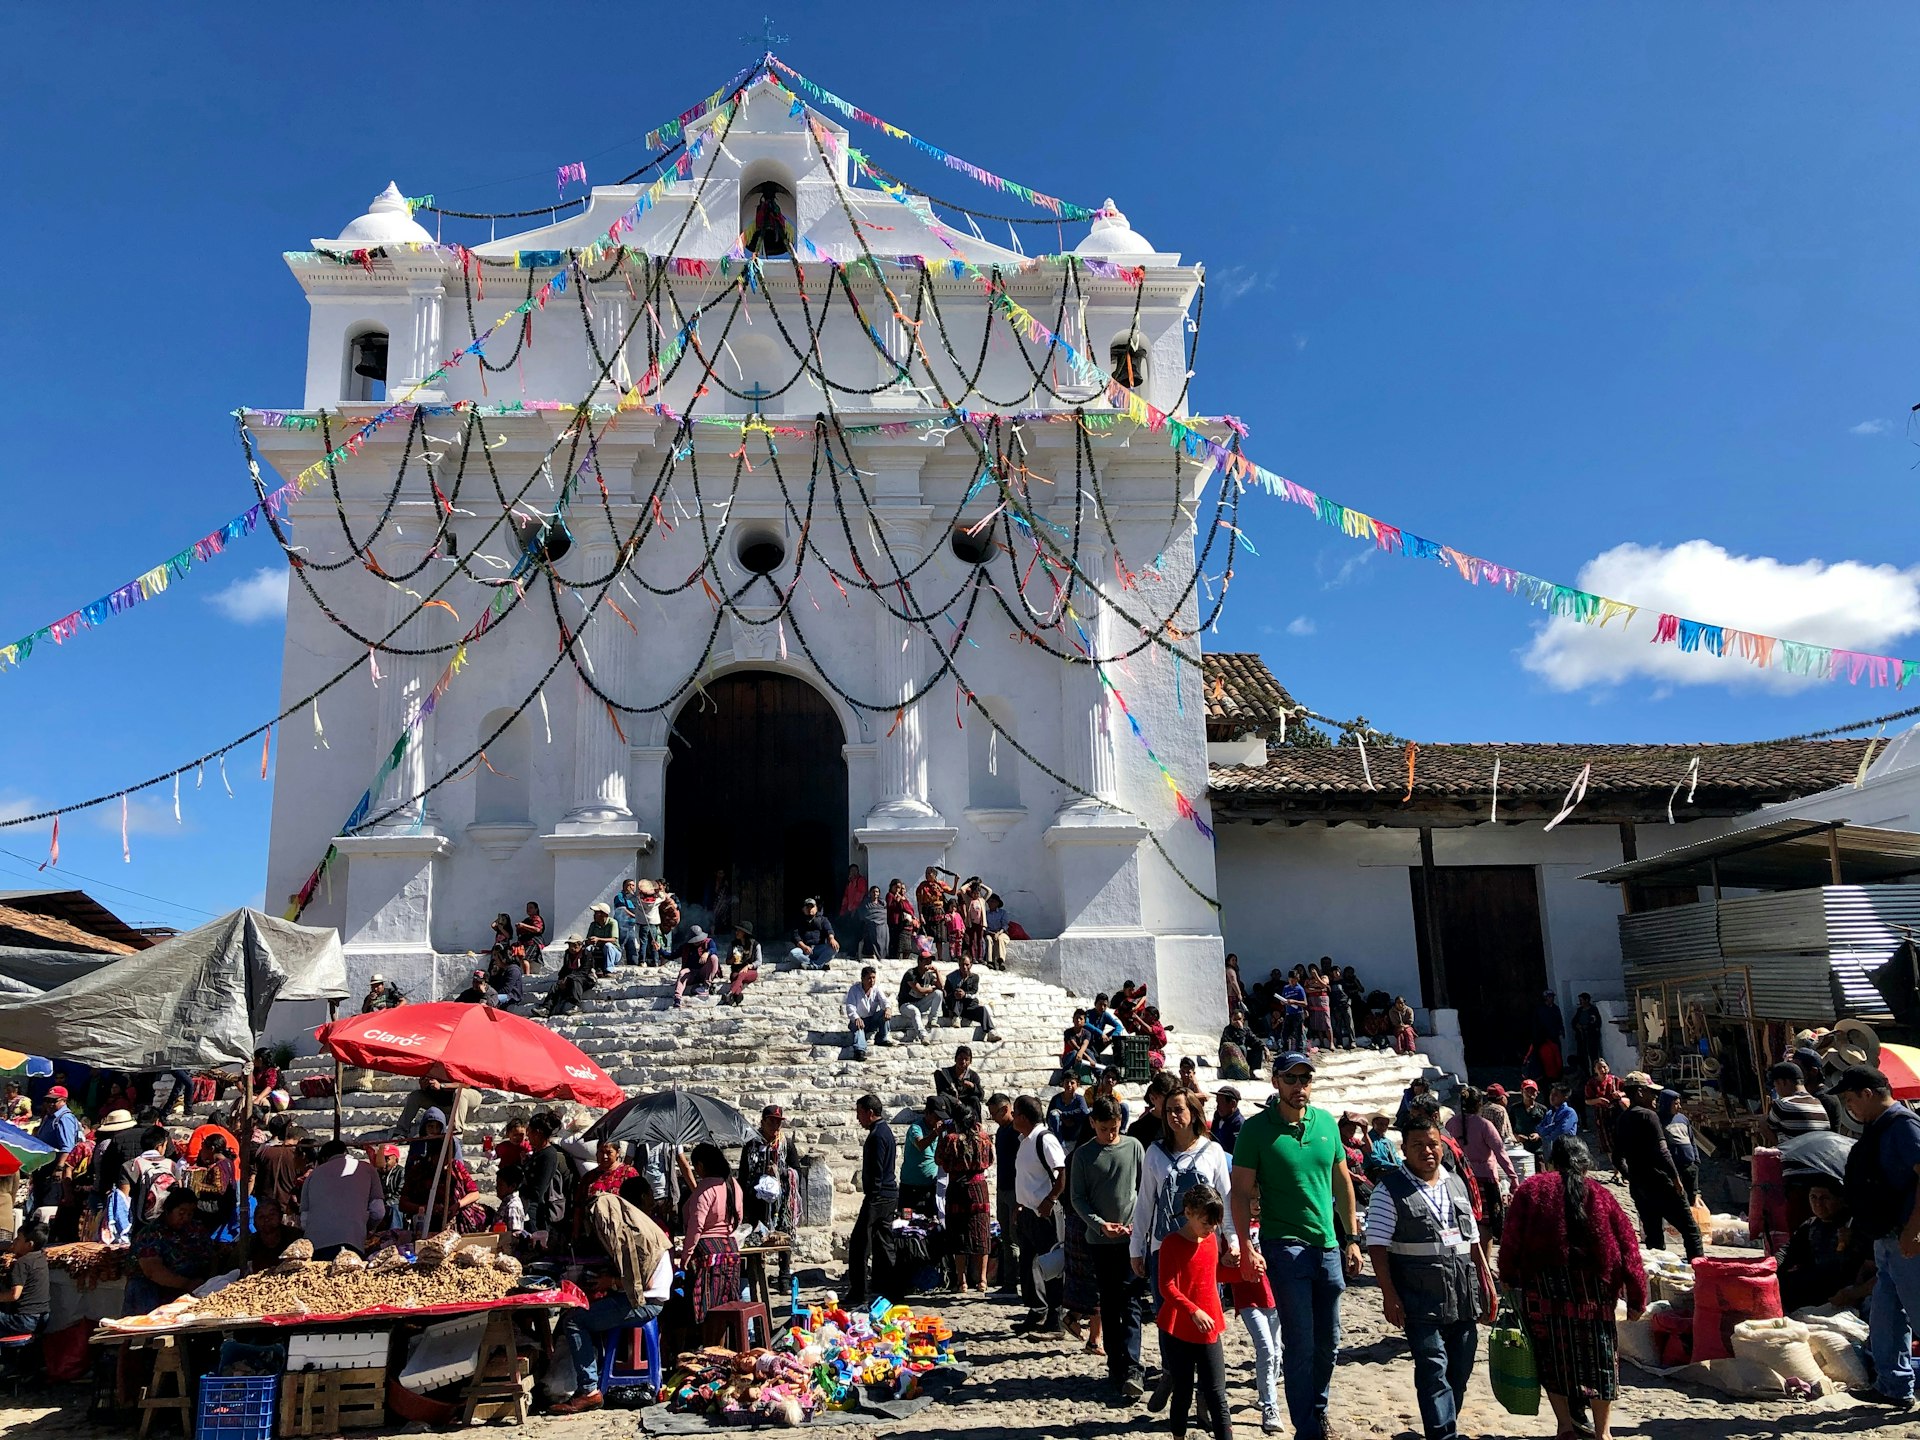 Church in Chichicastenango during the festival of Saint Thomas